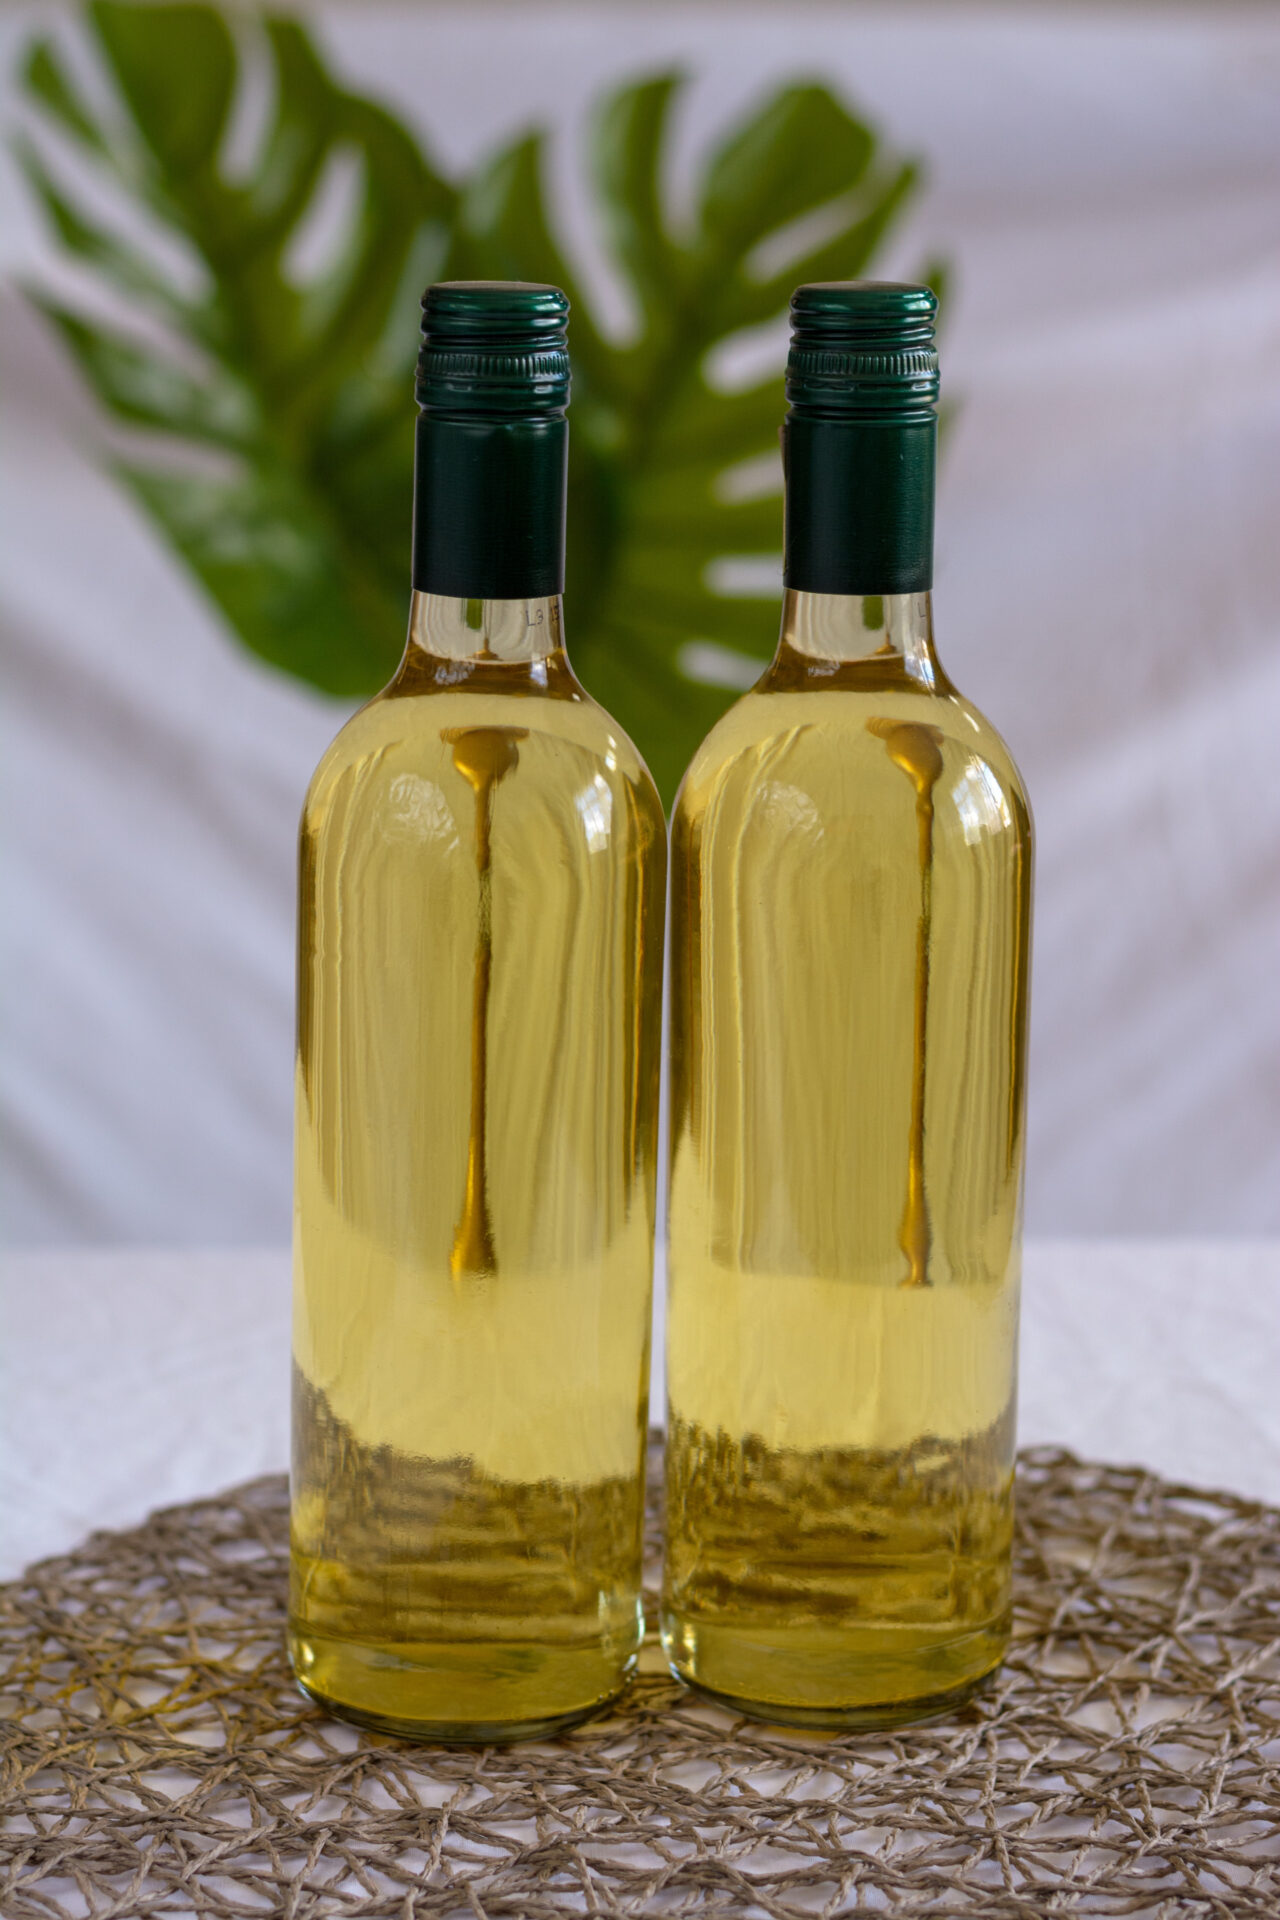 Two bottles of Pinot Grigio